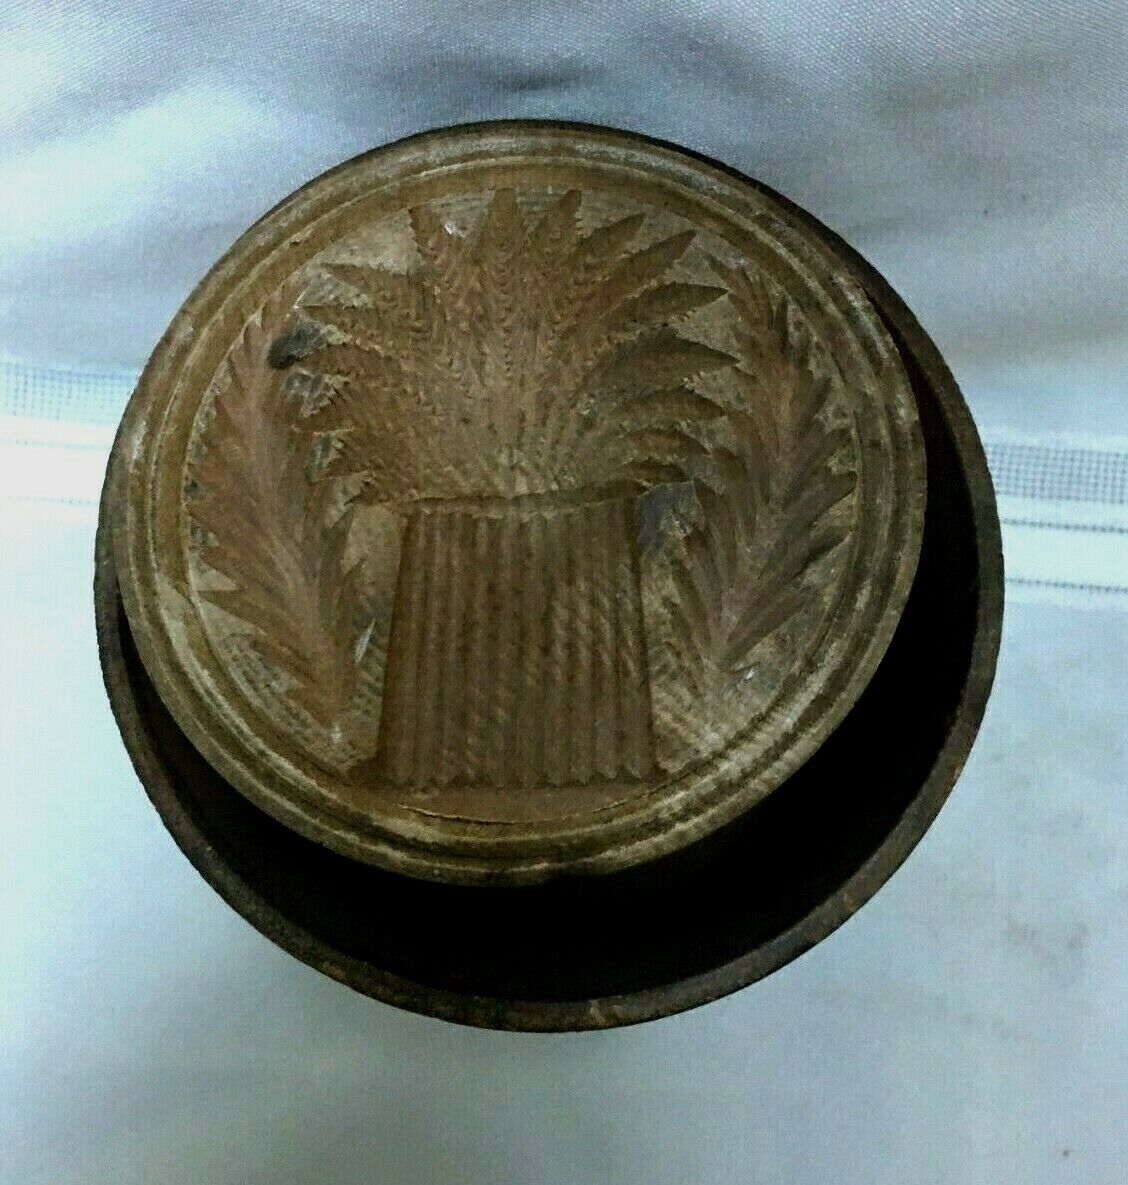 Large Antique Wooden Butter Mold Plunger Press-Carved Wheat Design-Early Patina